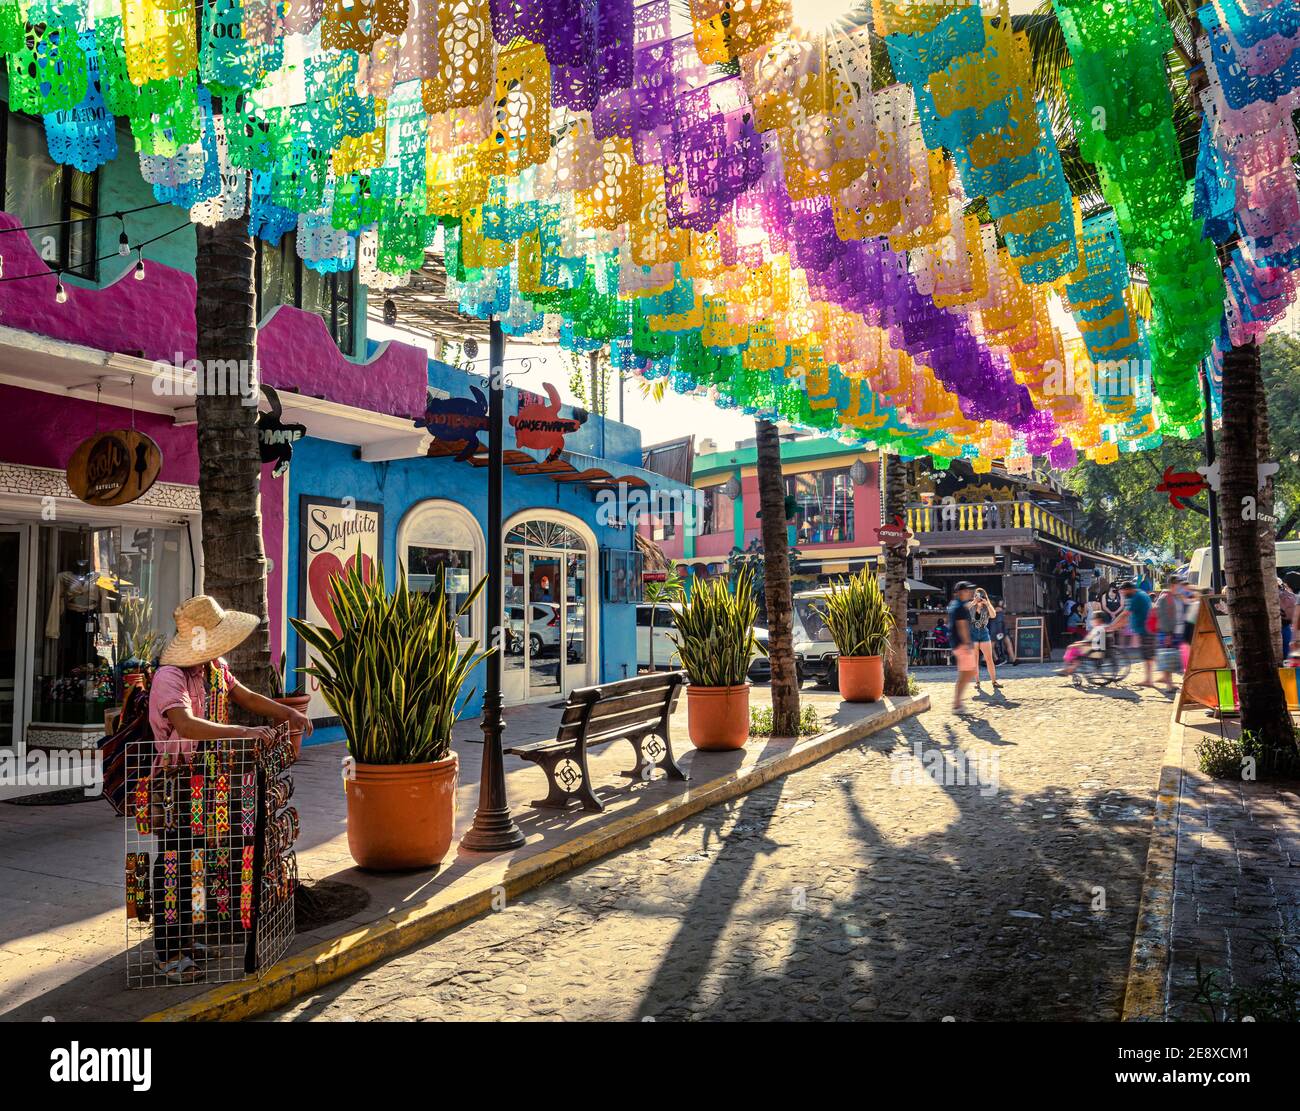 Colorful banners decorate the downtown of Sayulita, Nayarit, Mexico. Stock Photo